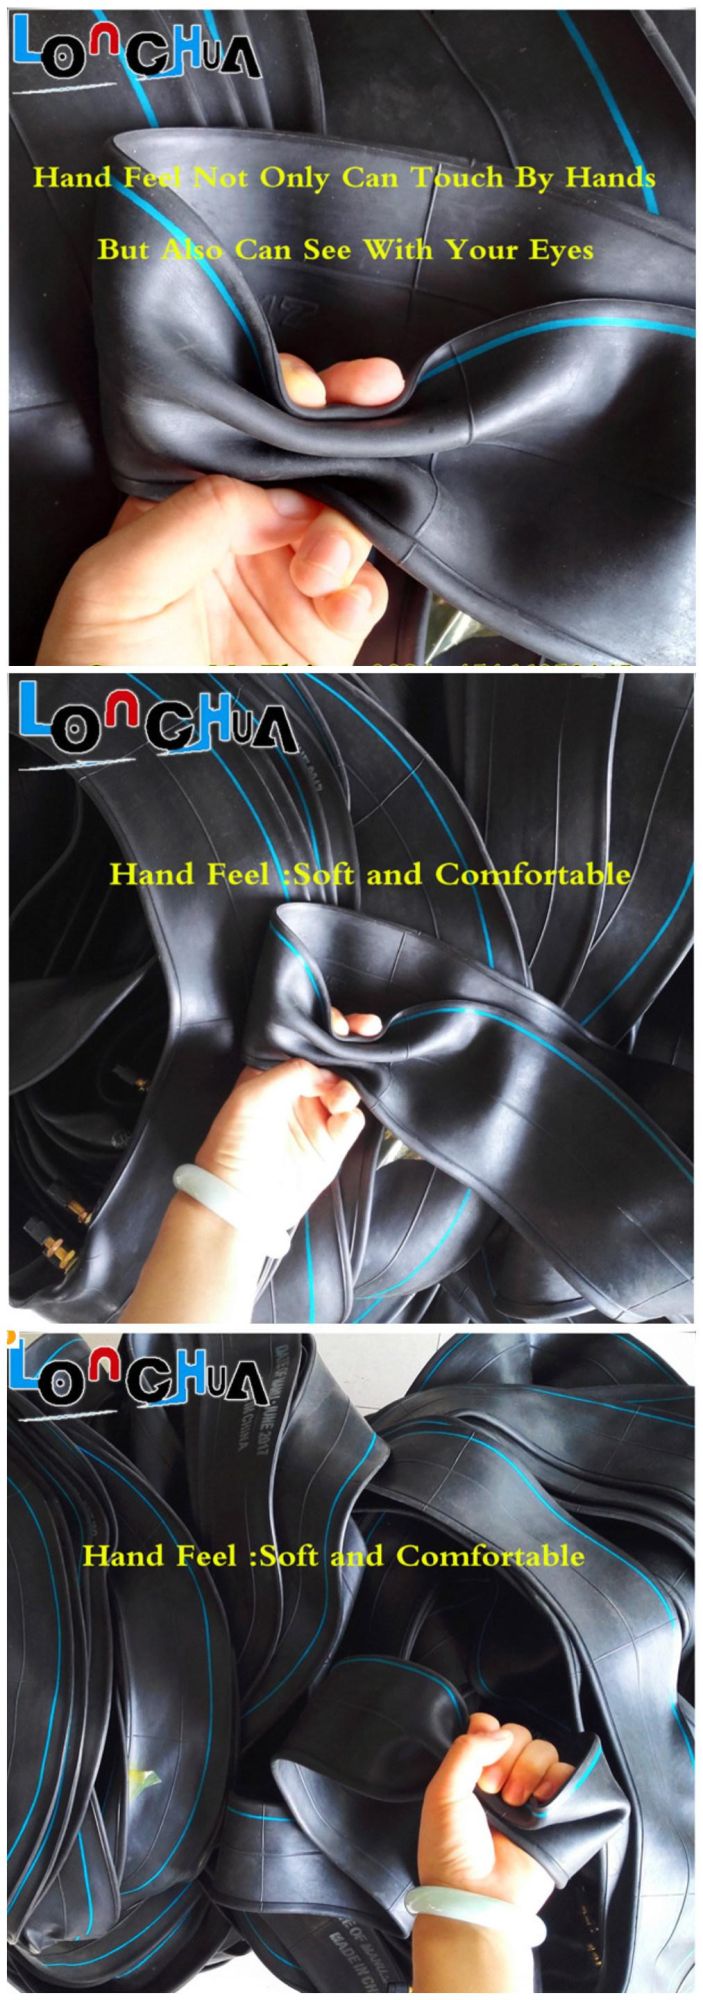 Tensile Strength 8MPa-12MPa Motorcycle Natural Inner Tube (100/90-17)